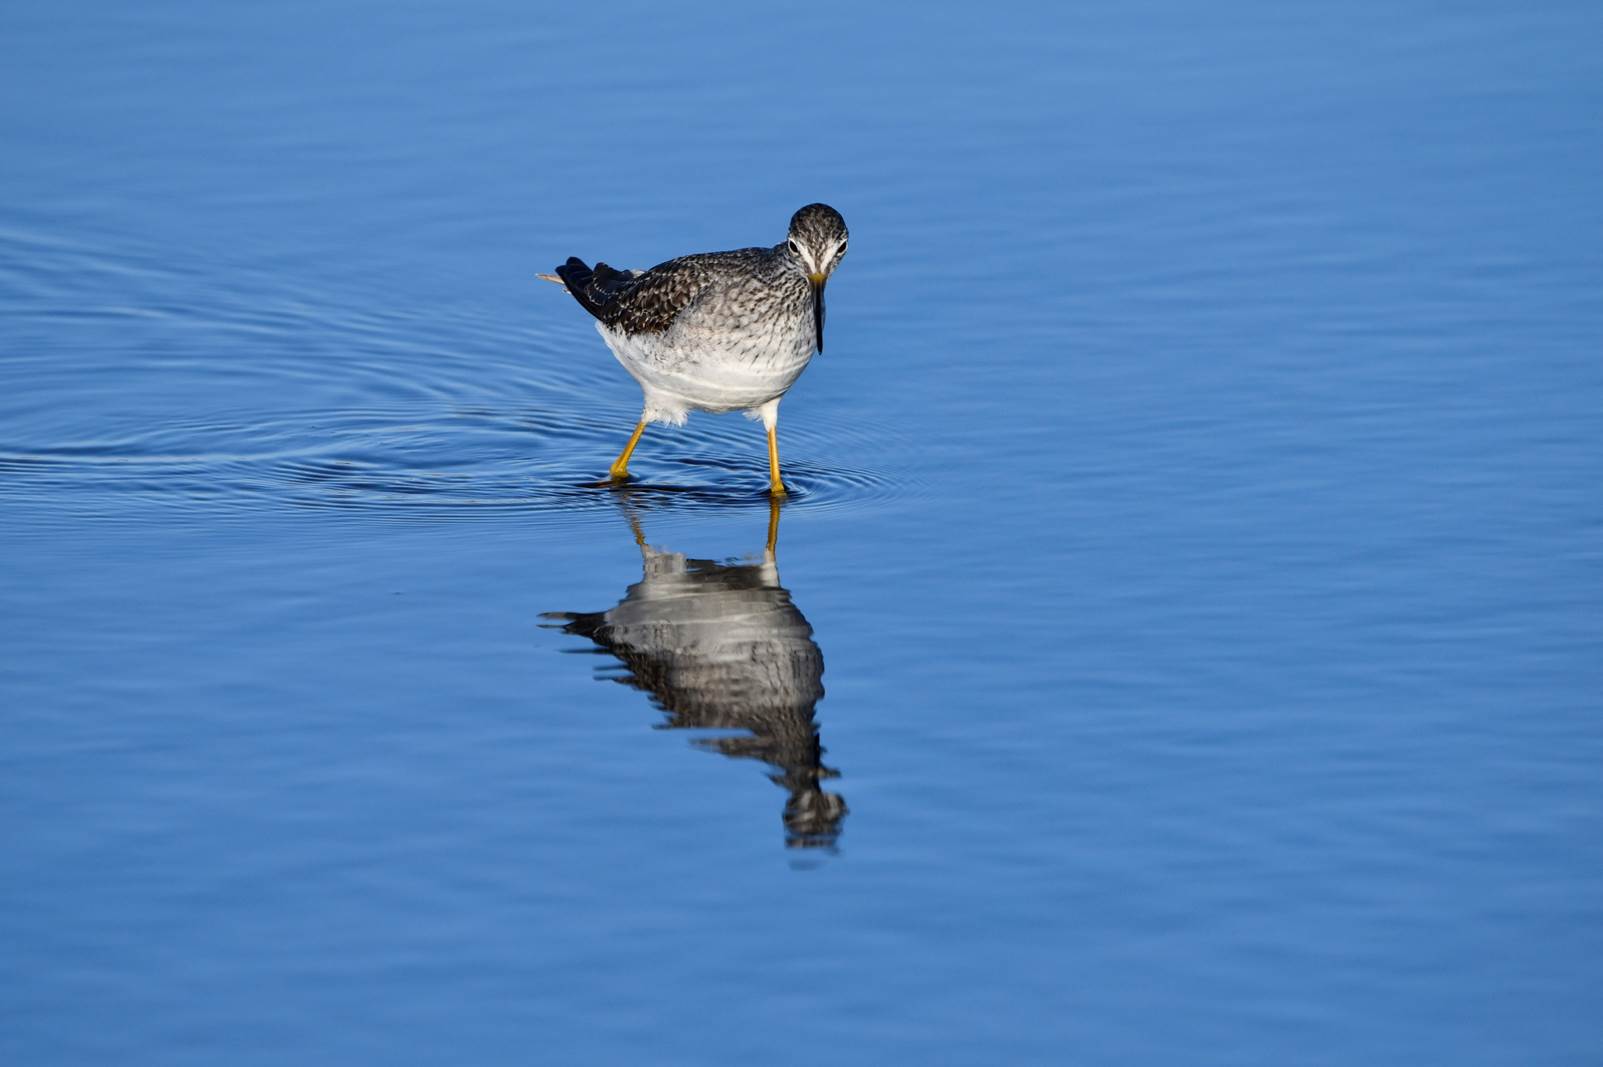 A bird standing in water

Description automatically generated